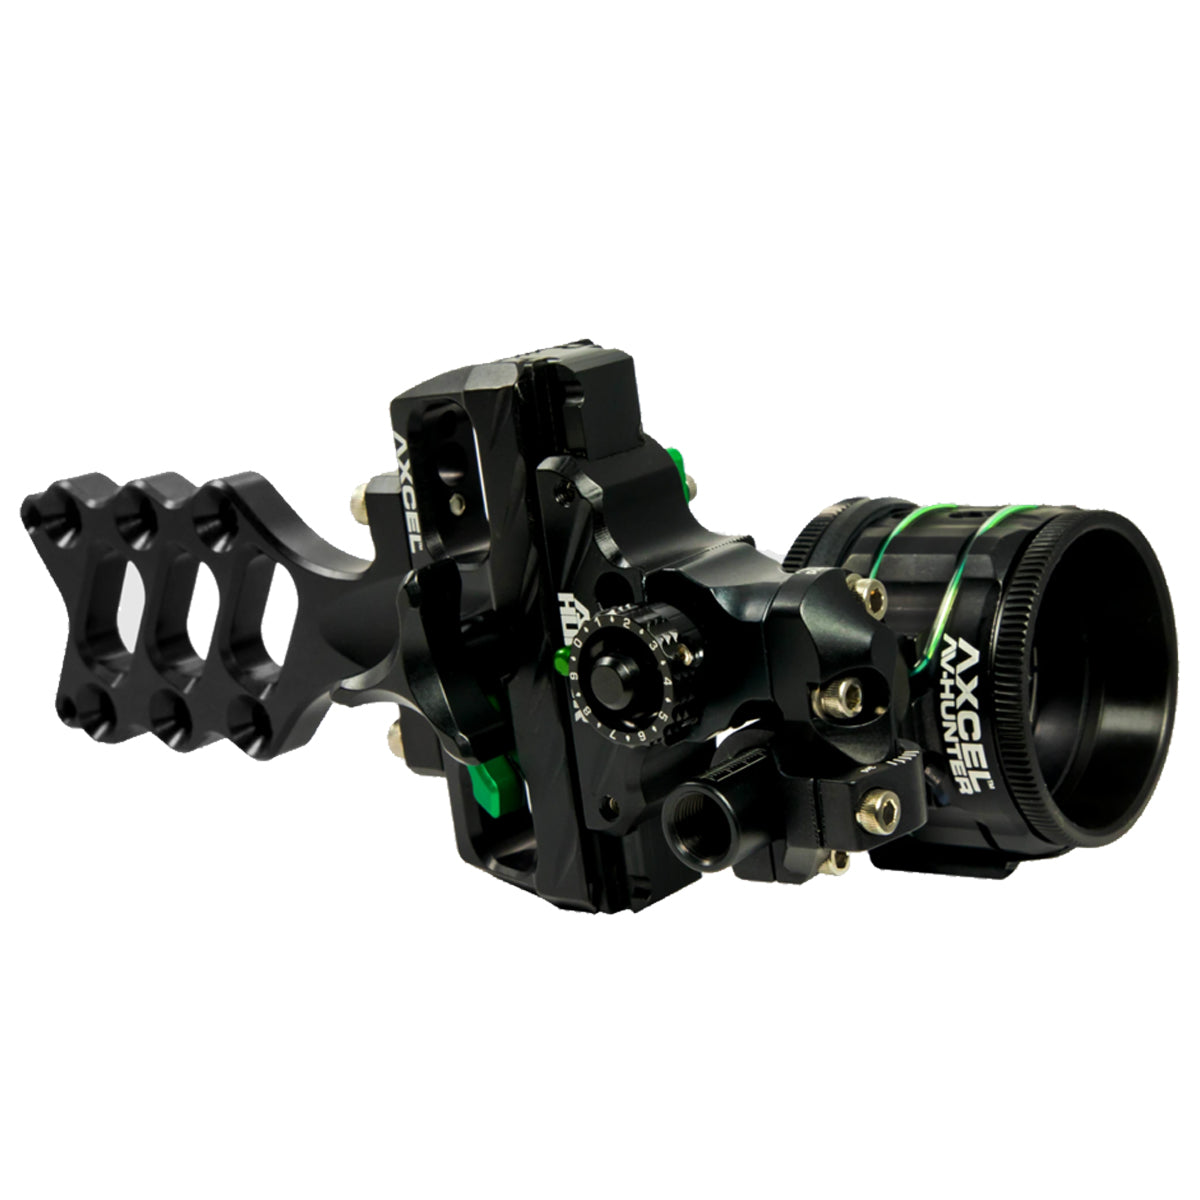 Axcel AccuHunter Plus Bow Sight in  by GOHUNT | Axcel - GOHUNT Shop